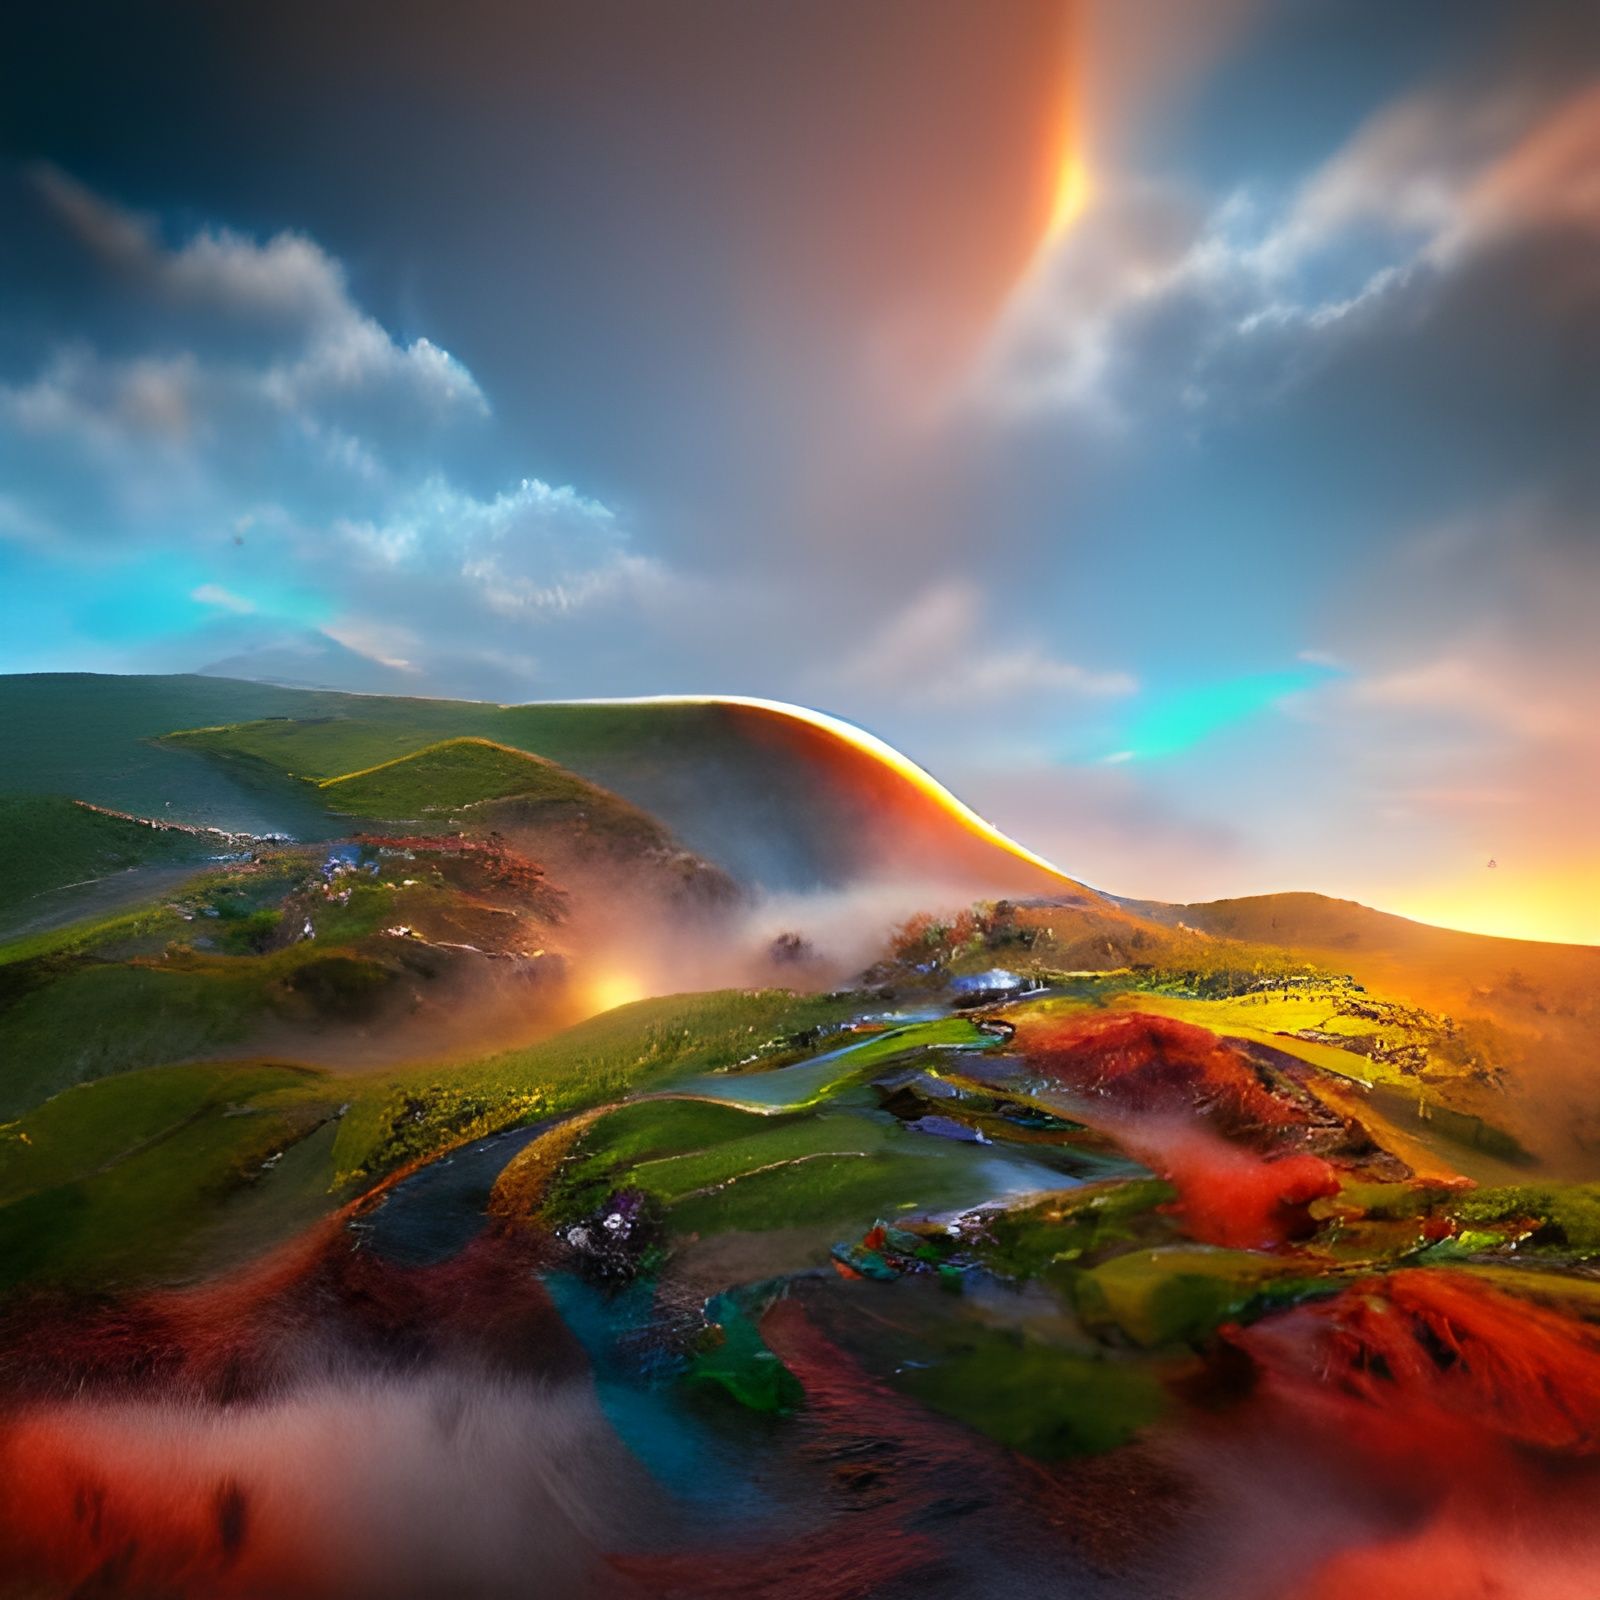 Snertar: Mountains and rainbow, colorful world